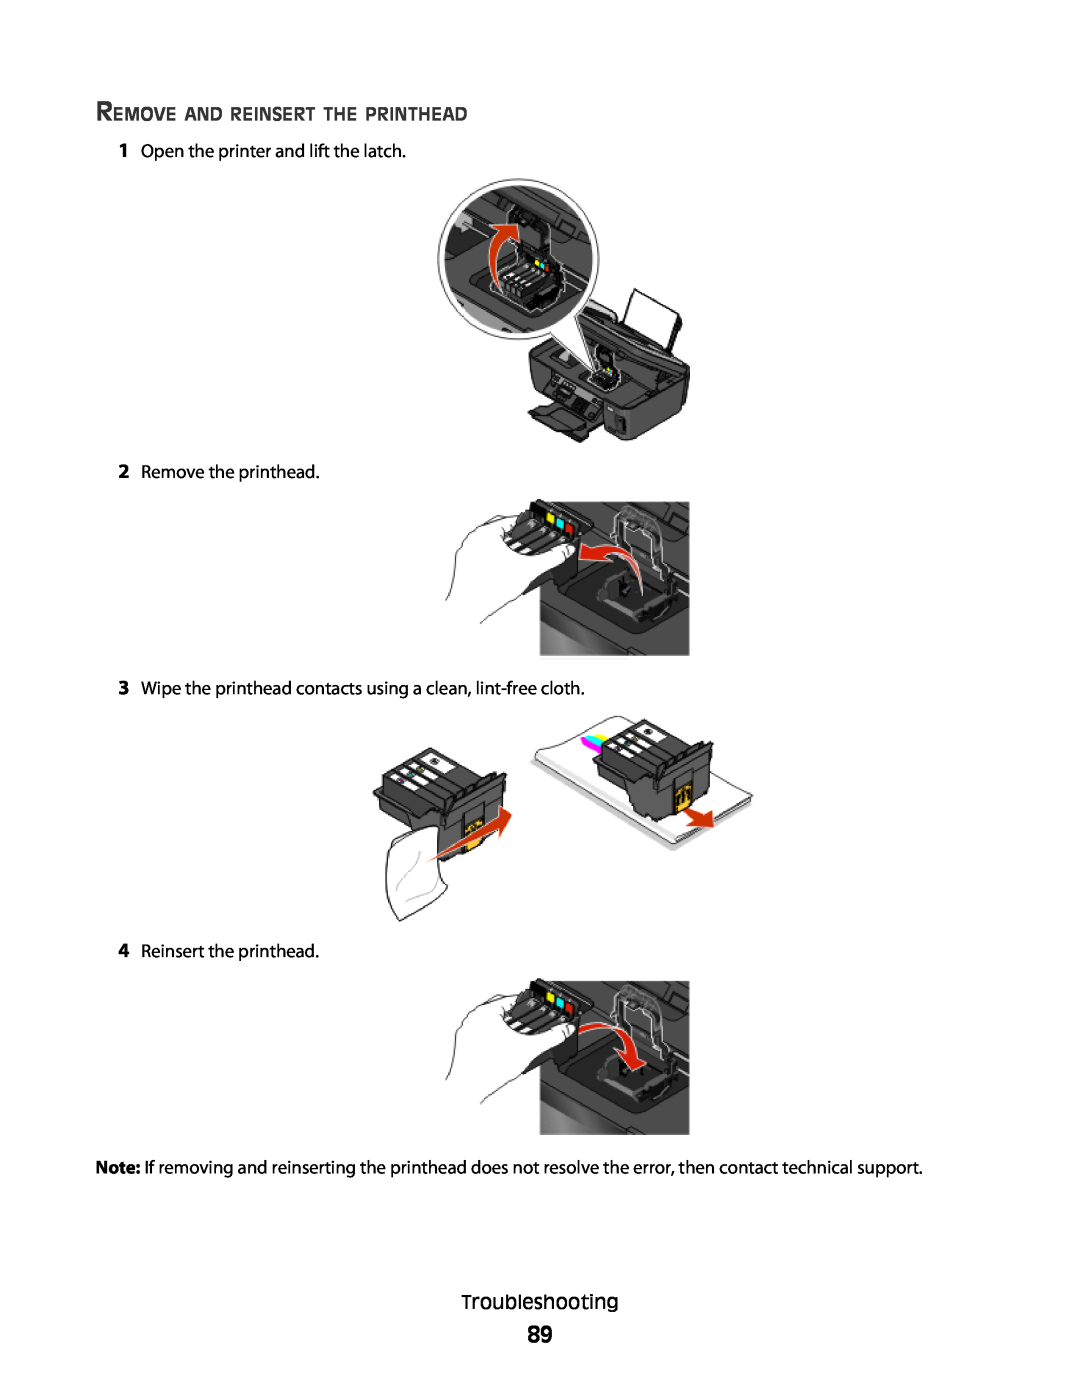 Lexmark 10E, 101 manual Remove And Reinsert The Printhead, 1Open the printer and lift the latch, 2Remove the printhead 